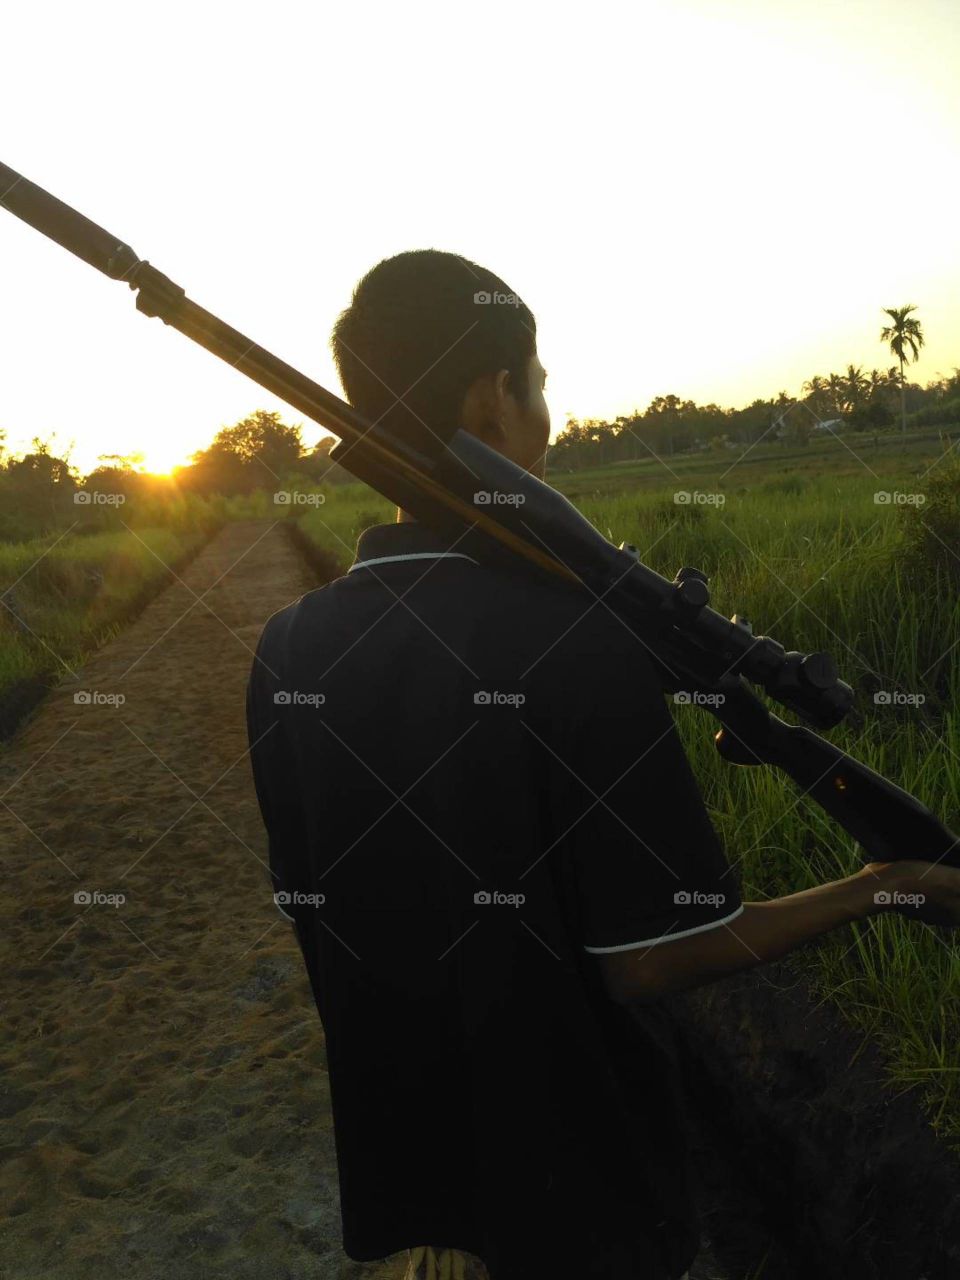 Let's go for hunting some bird's on the wet rice field.